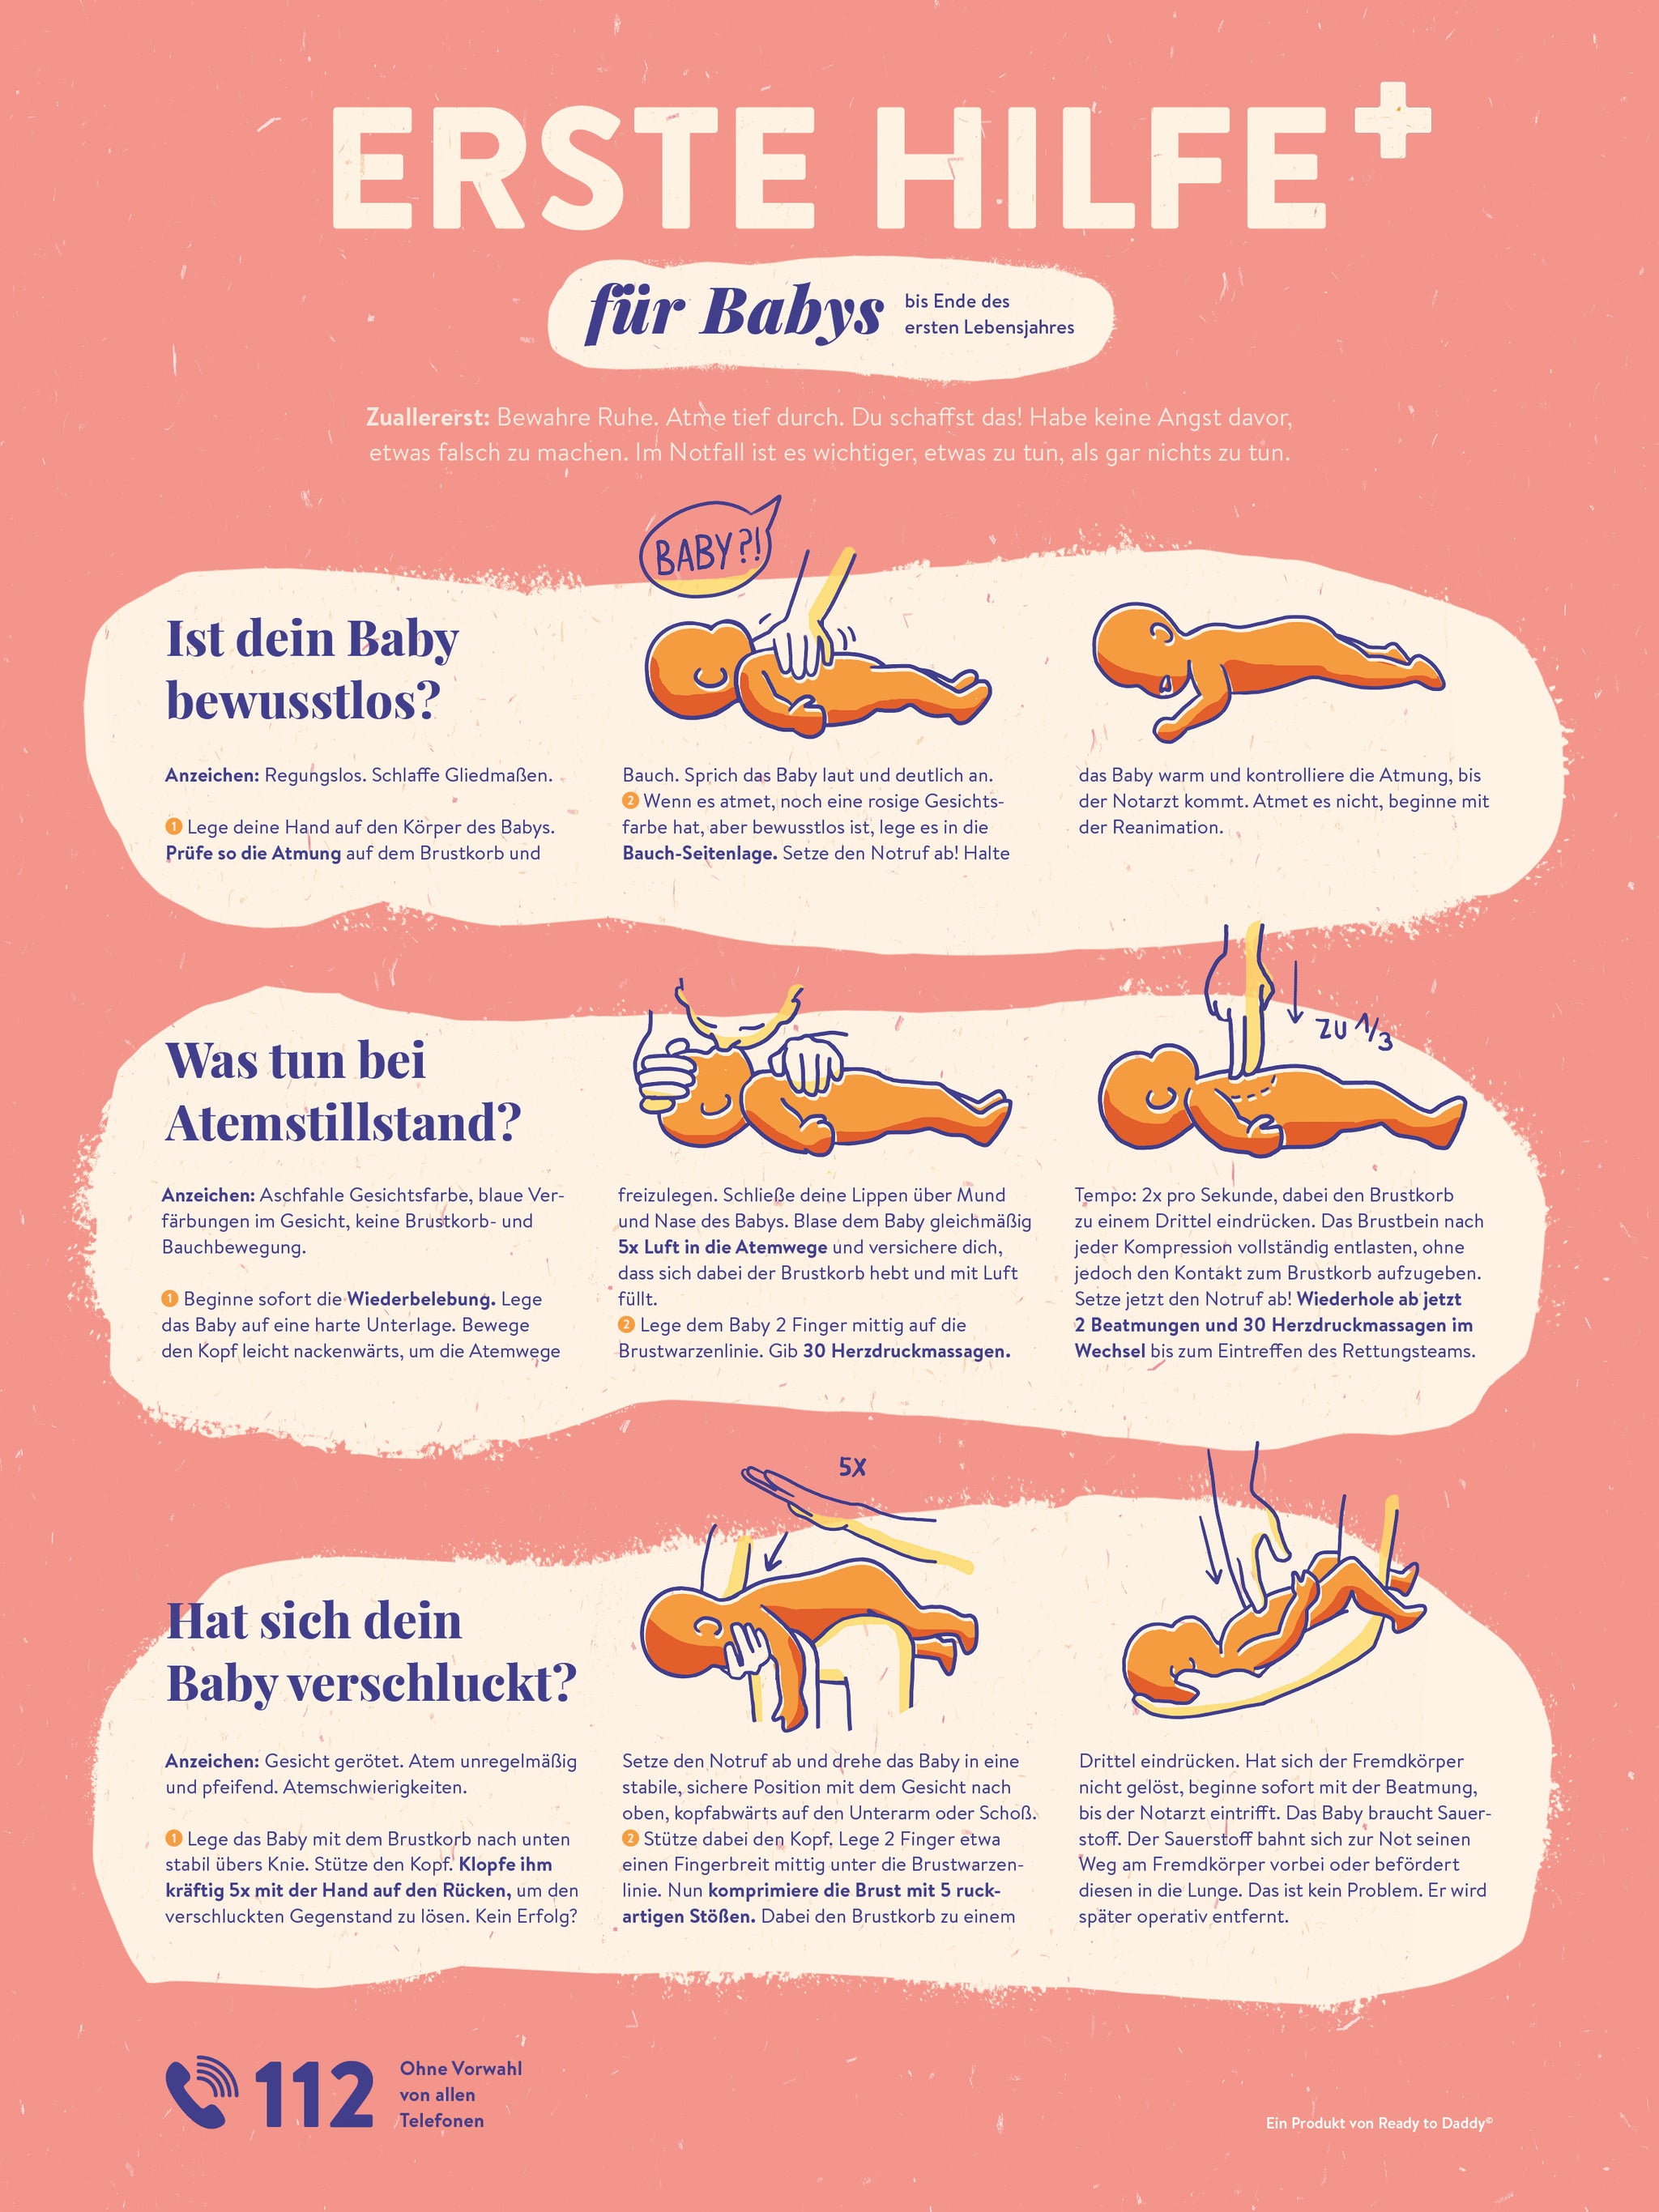 ERSTE HILFE für Babies - Poster - Ready to Daddy Products UG